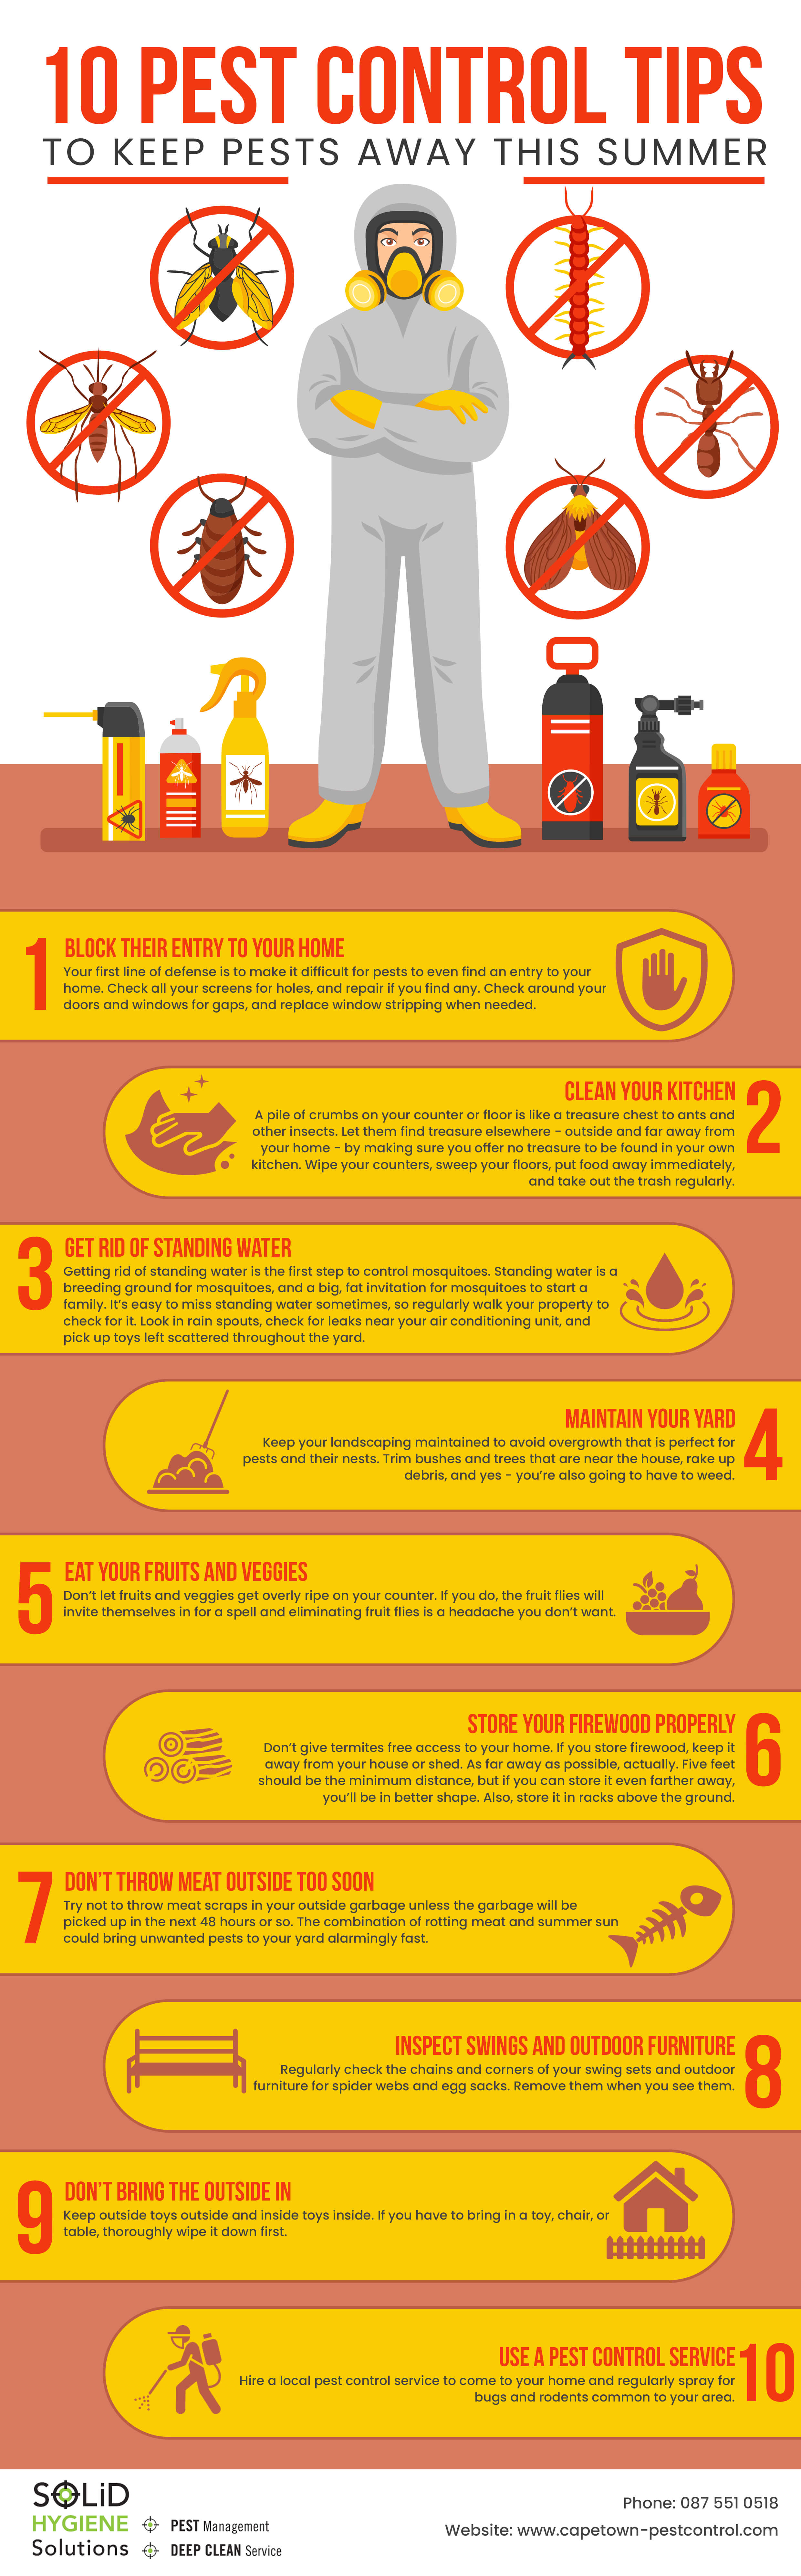 10-pest-control-tips-infographic-plaza